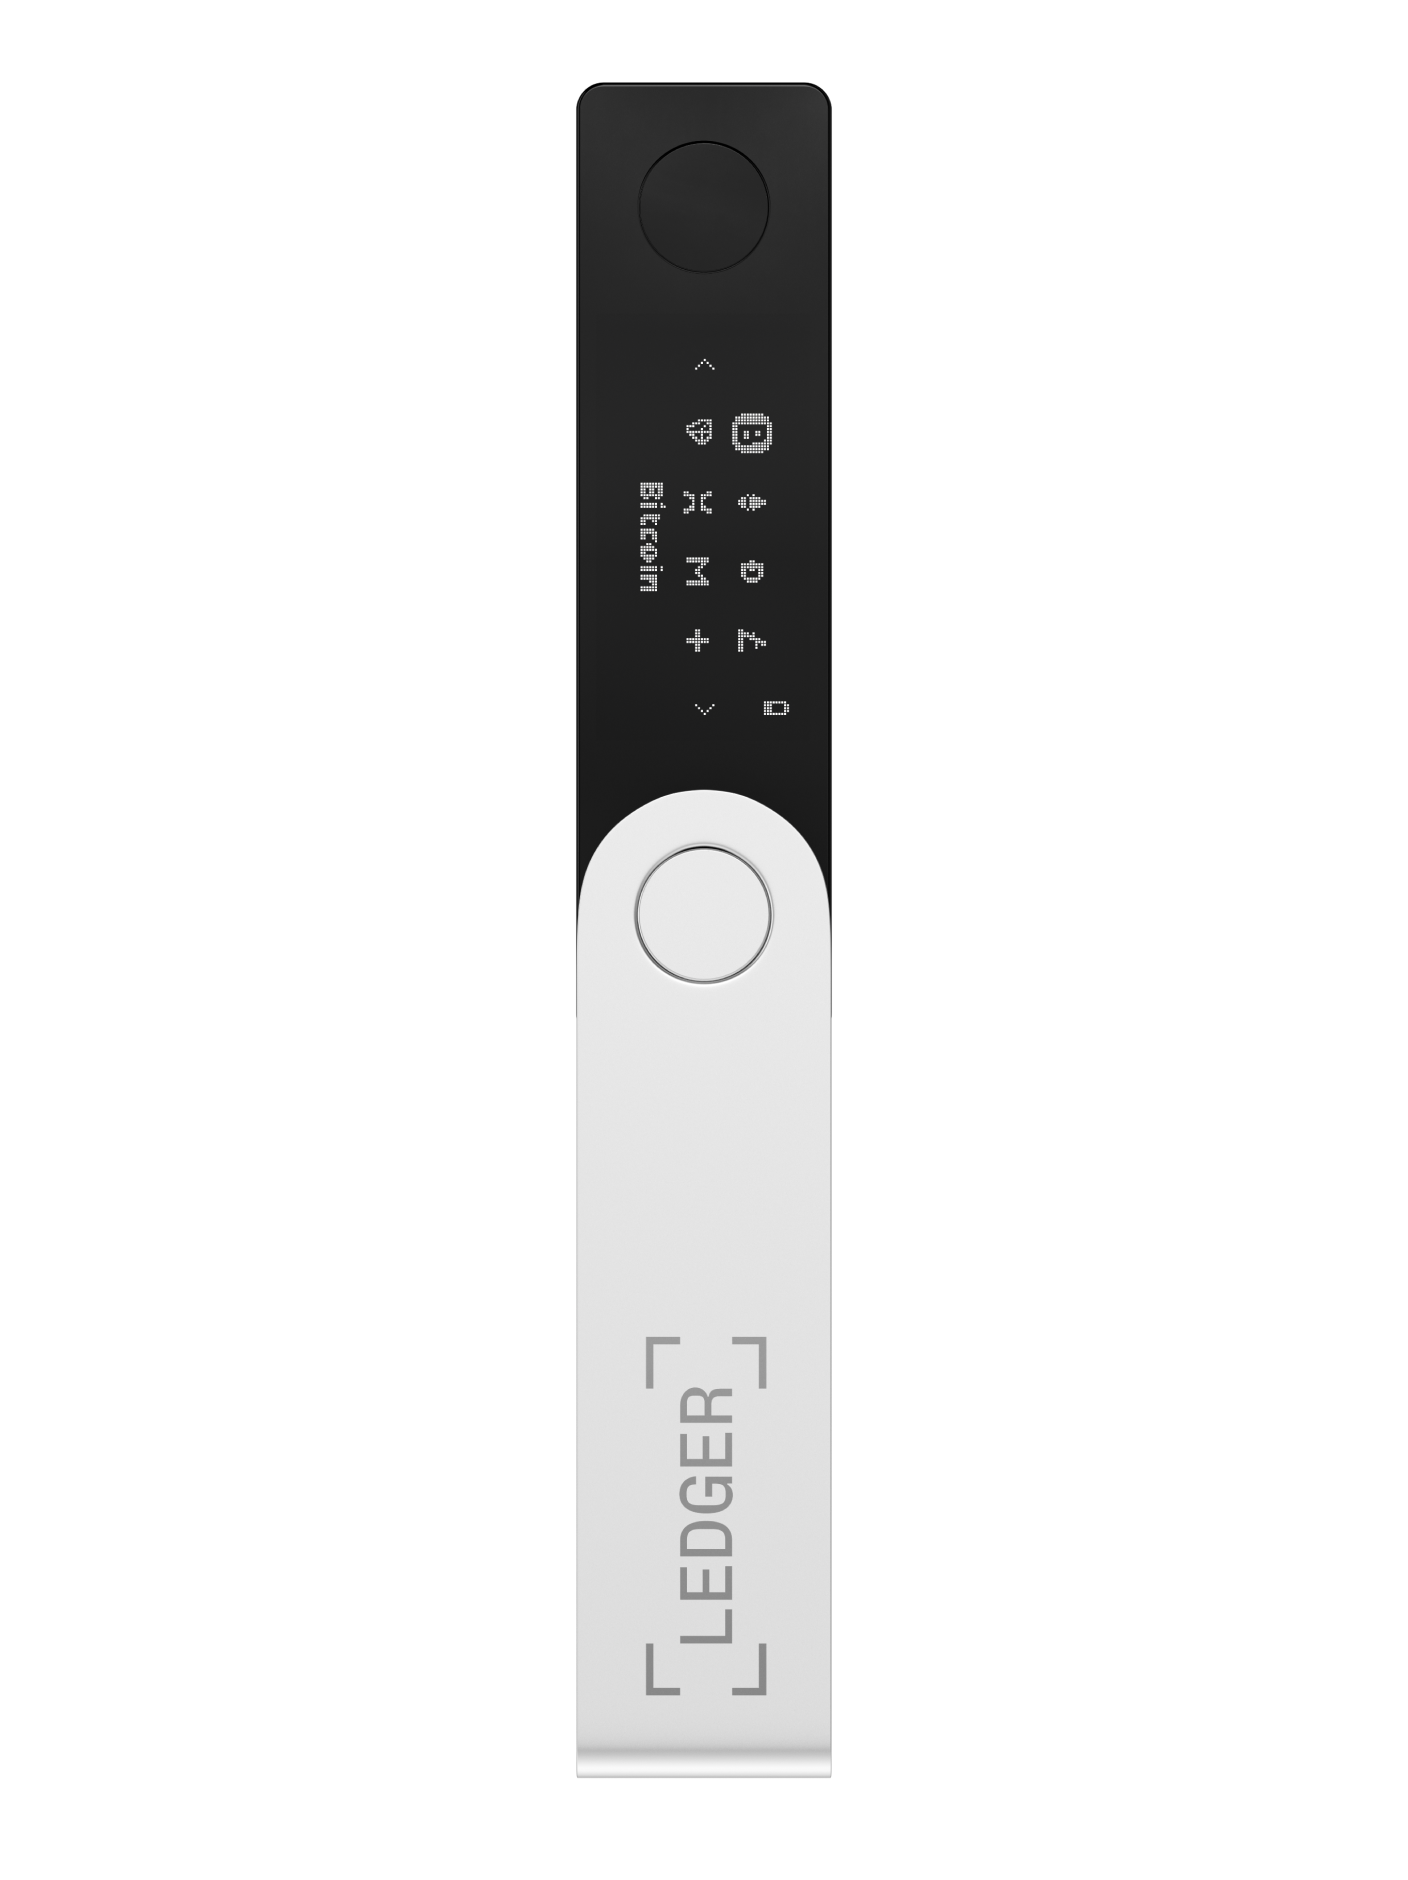 Ledger Nano X Review 2023: Hands On with The Latest Hardware Wallet